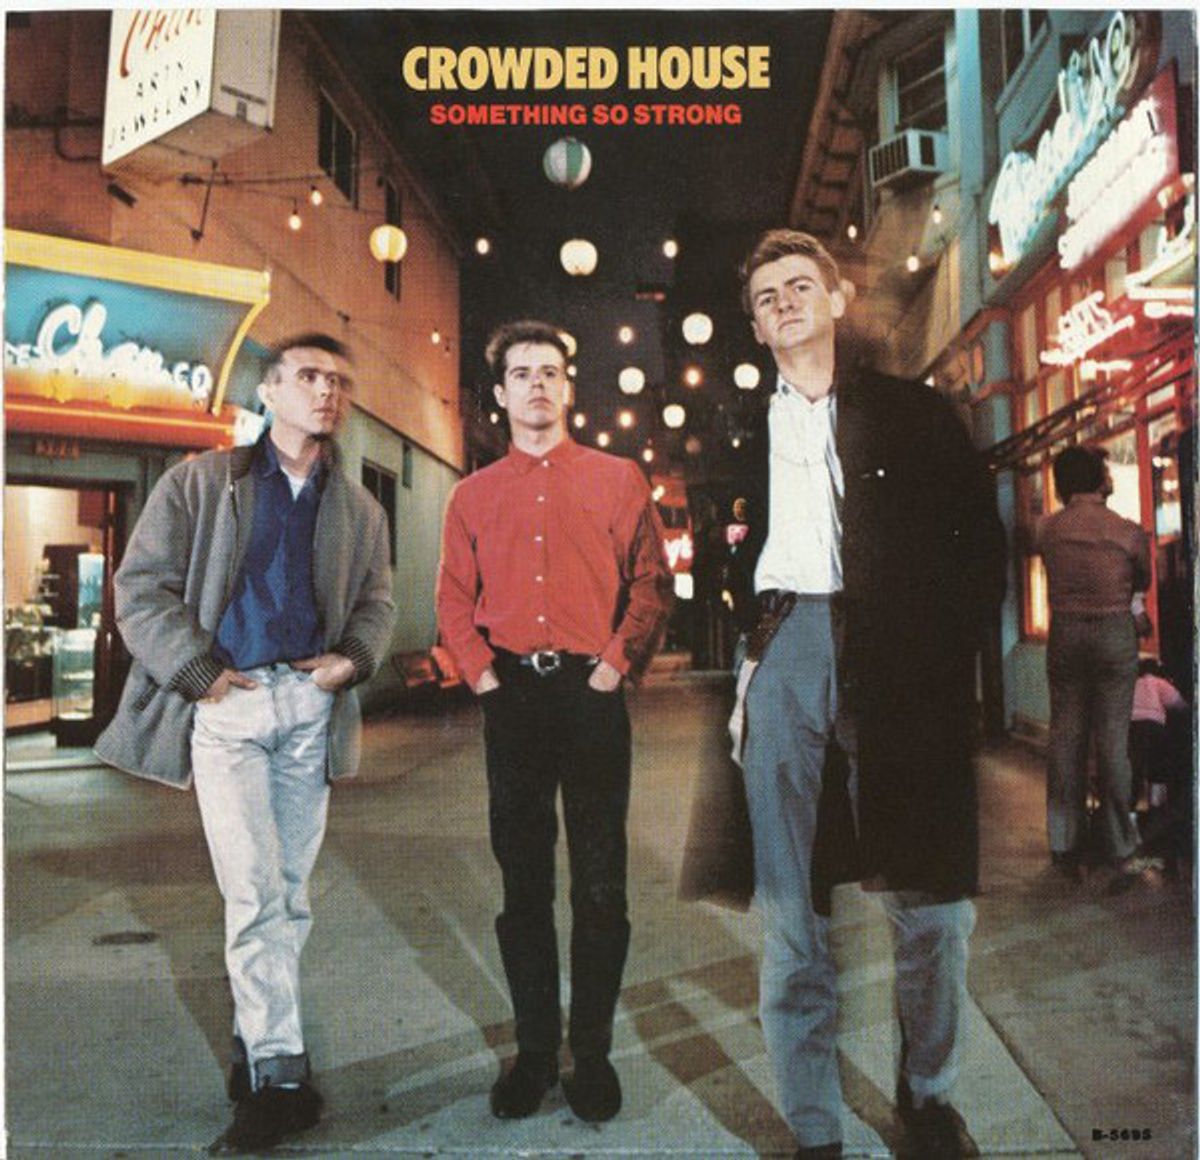 #MitchellFroom - Crowded House - Something So Strong (1986)